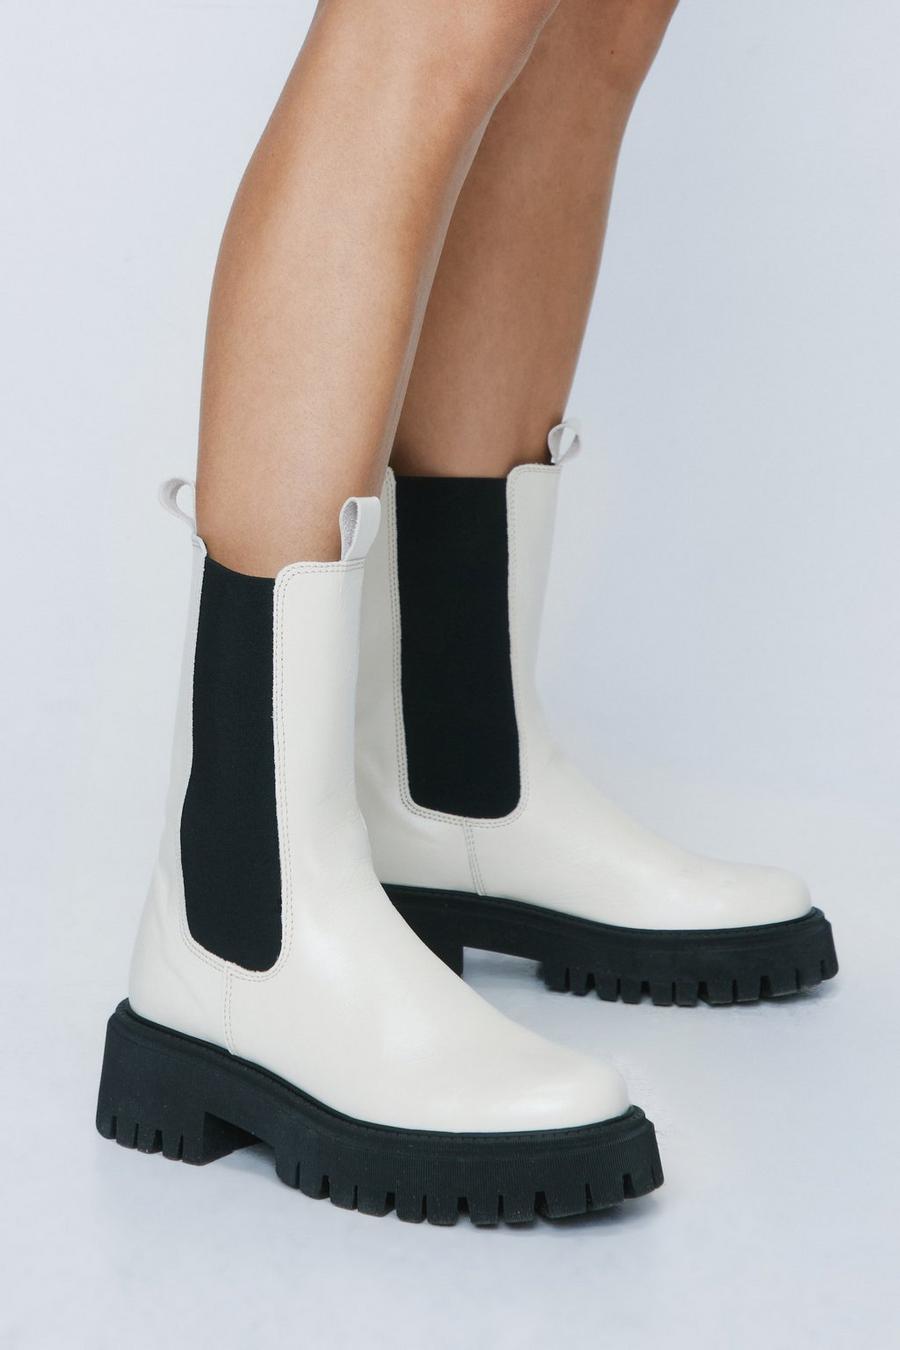 Chelsea Boots | Women's Chelsea Ankle Boots | Nasty Gal